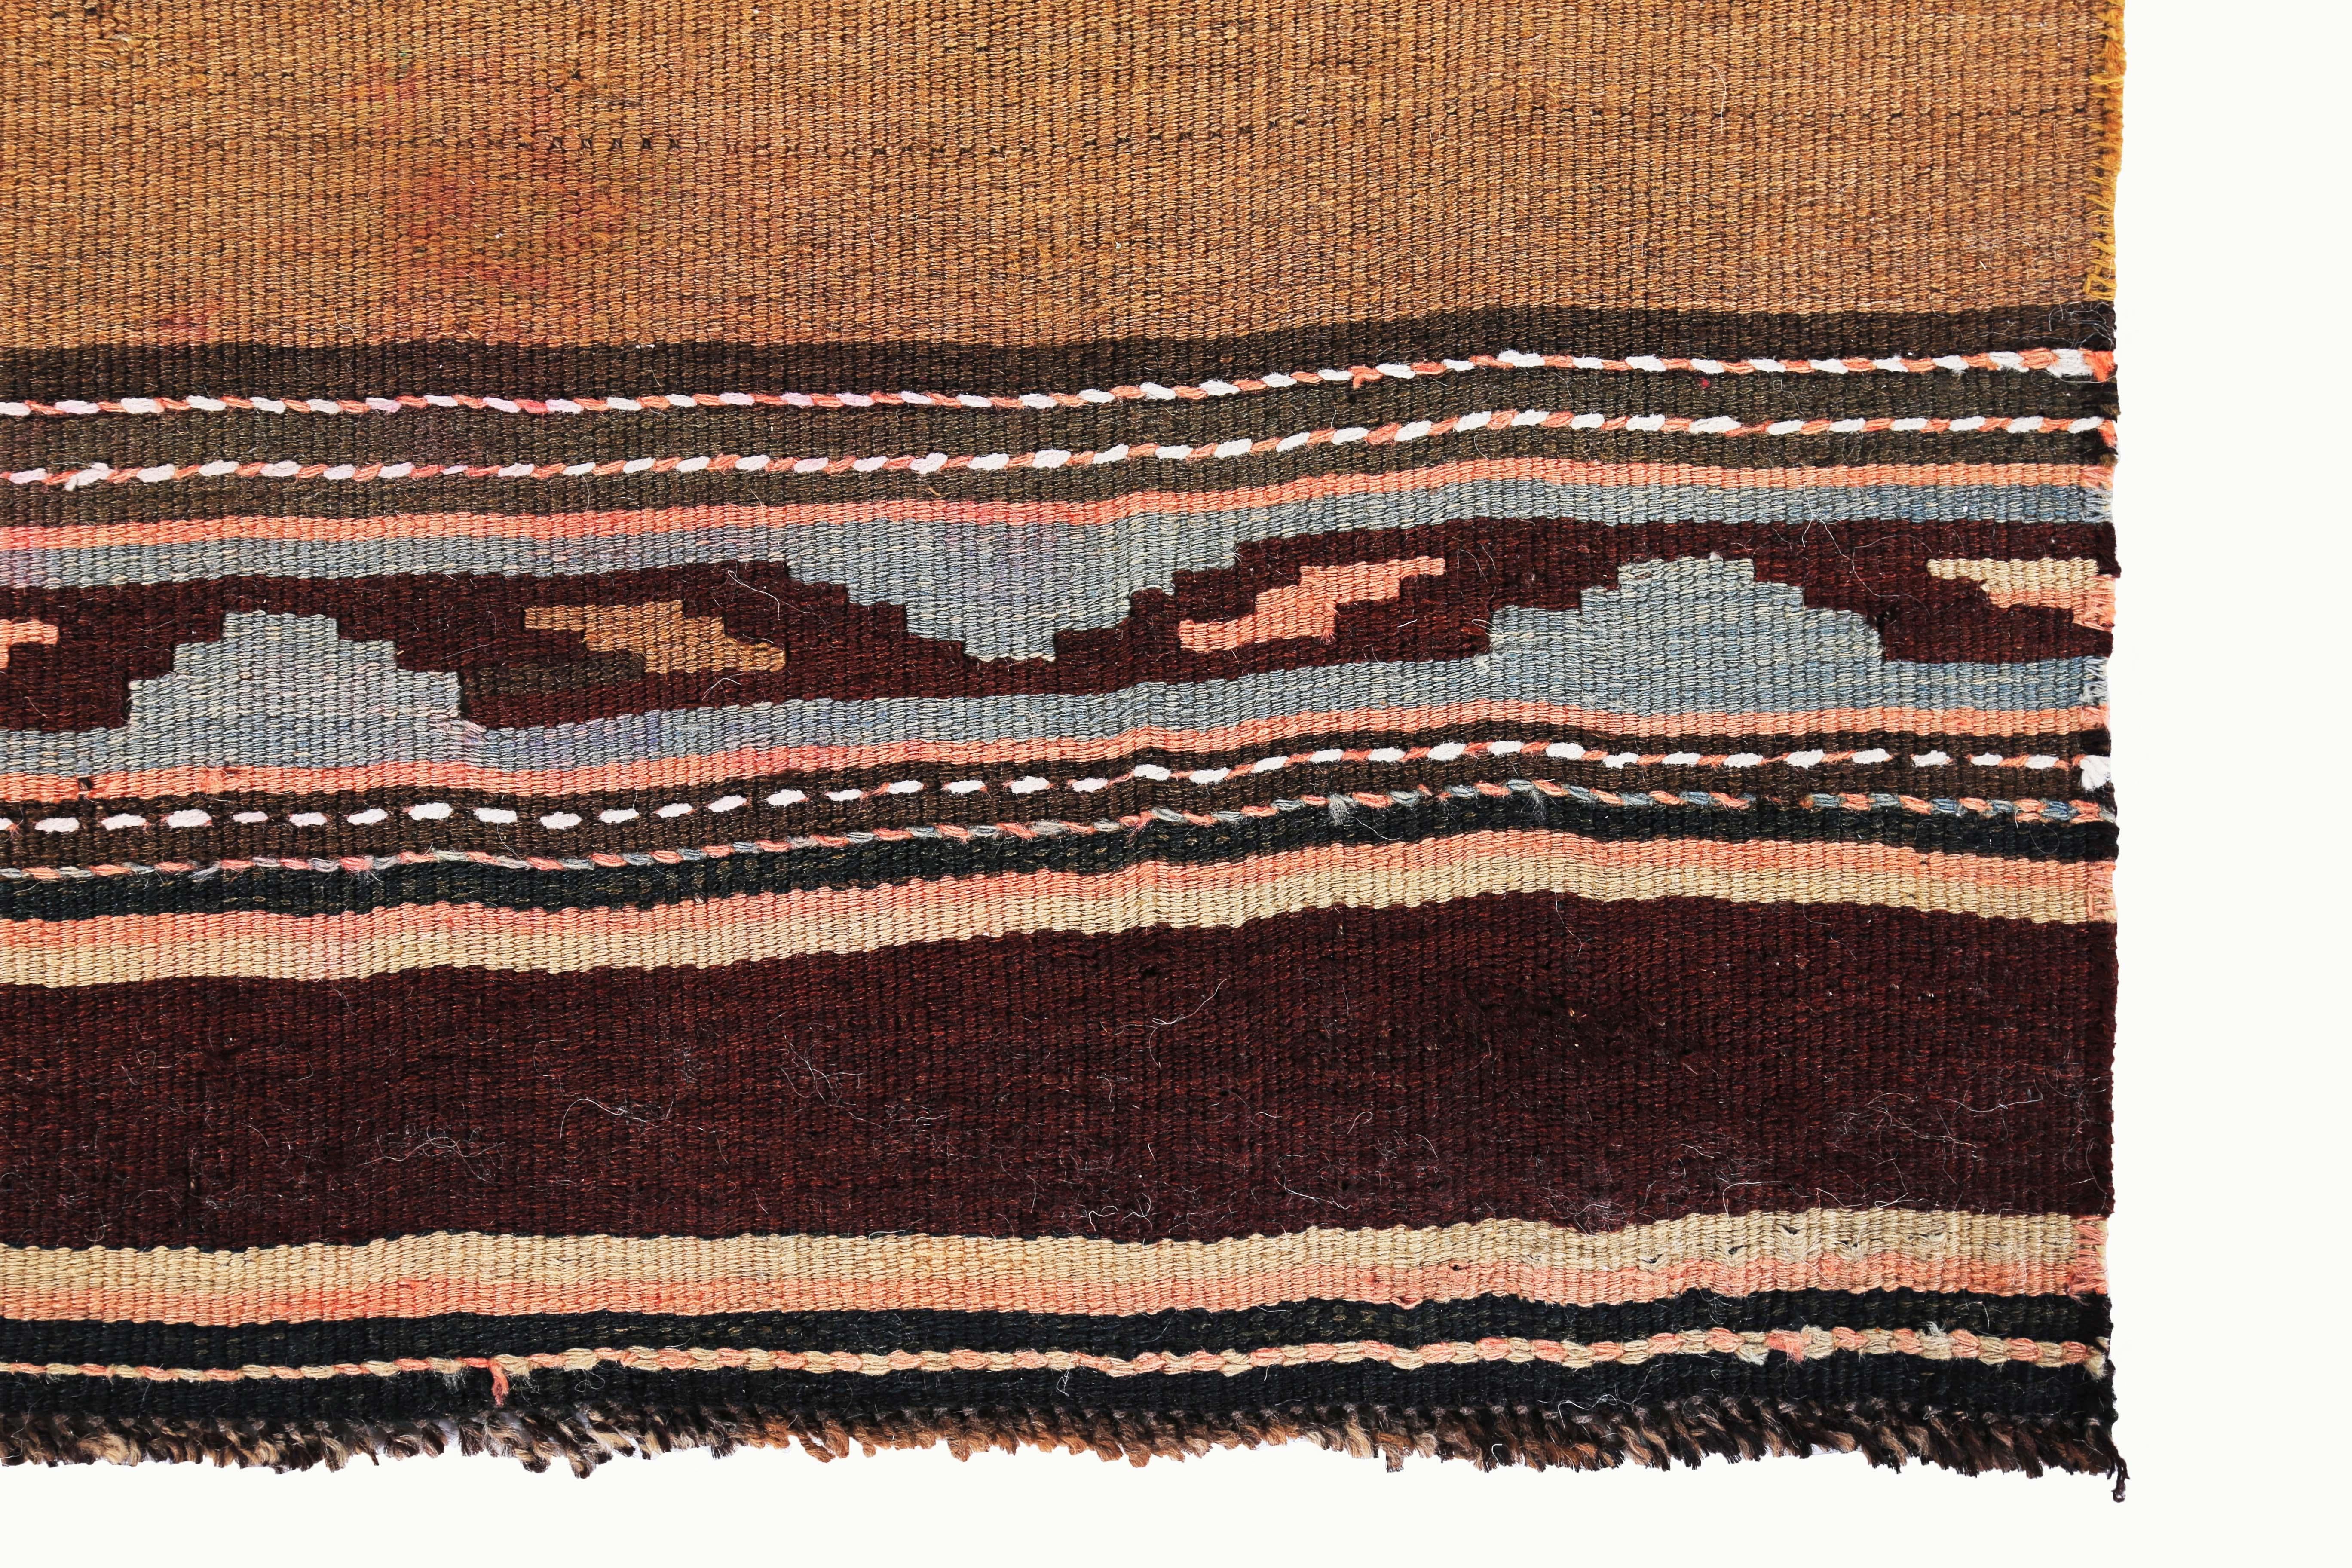 Hand-Woven Modern Turkish Kilim Rug with Brown, Orange and Beige Tribal Stripes For Sale